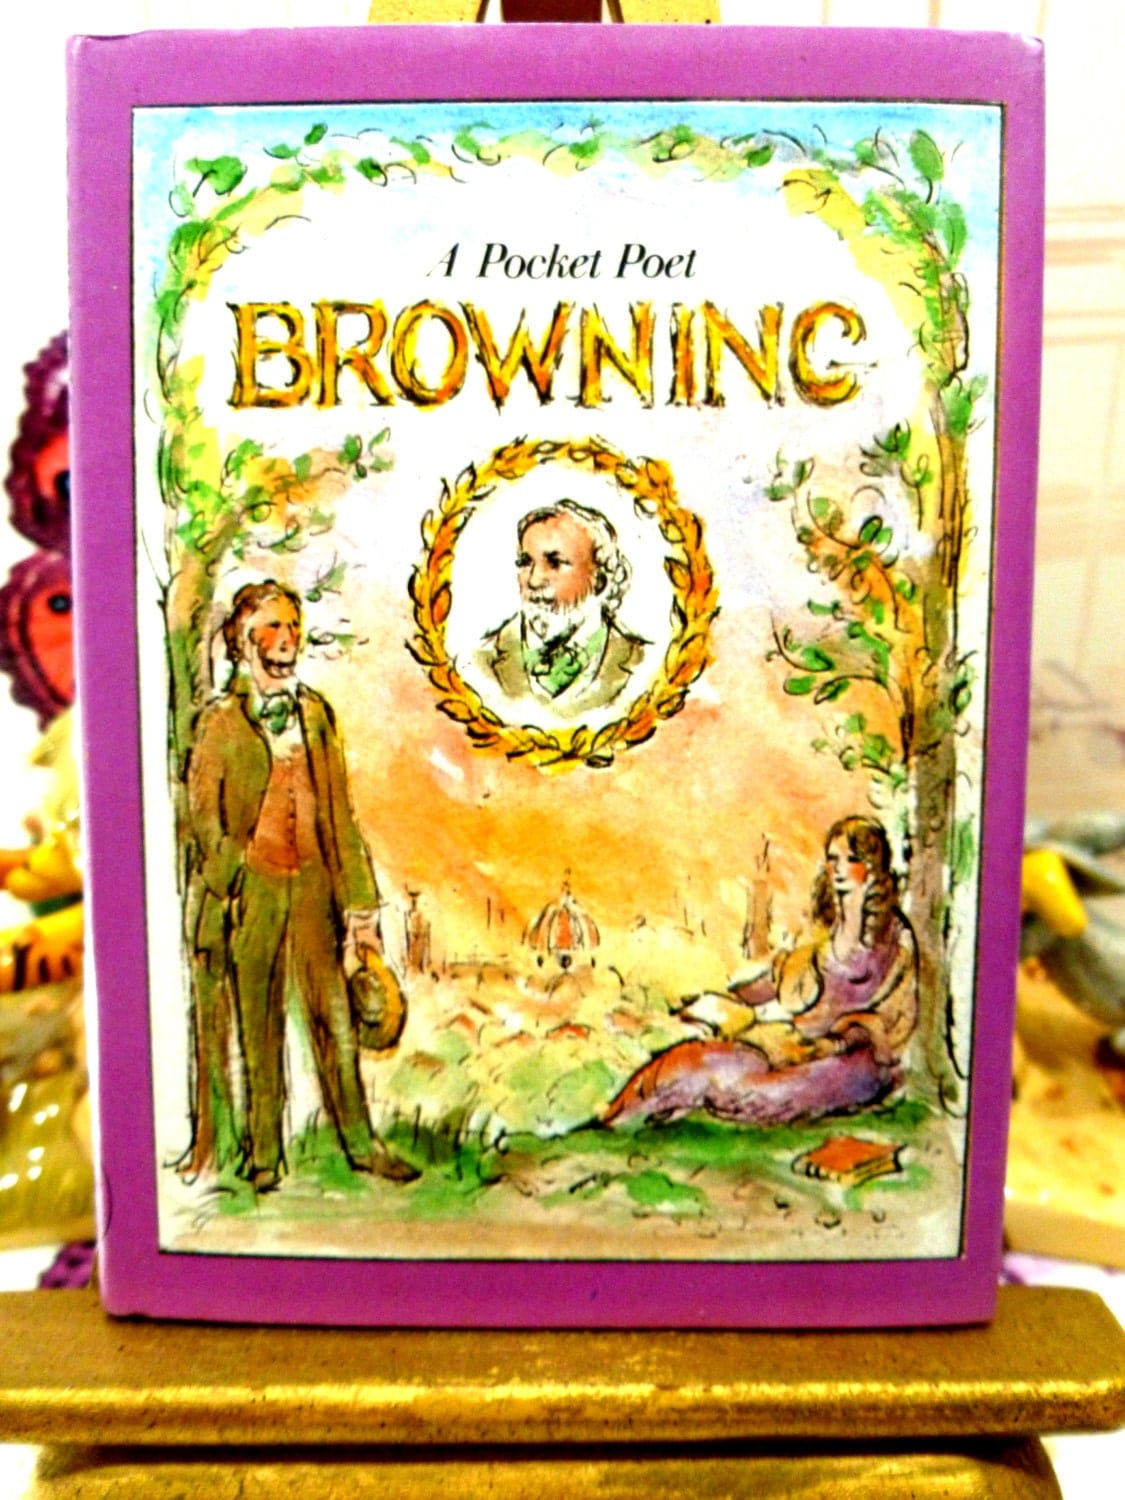 A Pocket Poet Browning Lovely Illustrated Vintage Hardback Poetry Book Robert Browning Romantic Gift Childe Roland